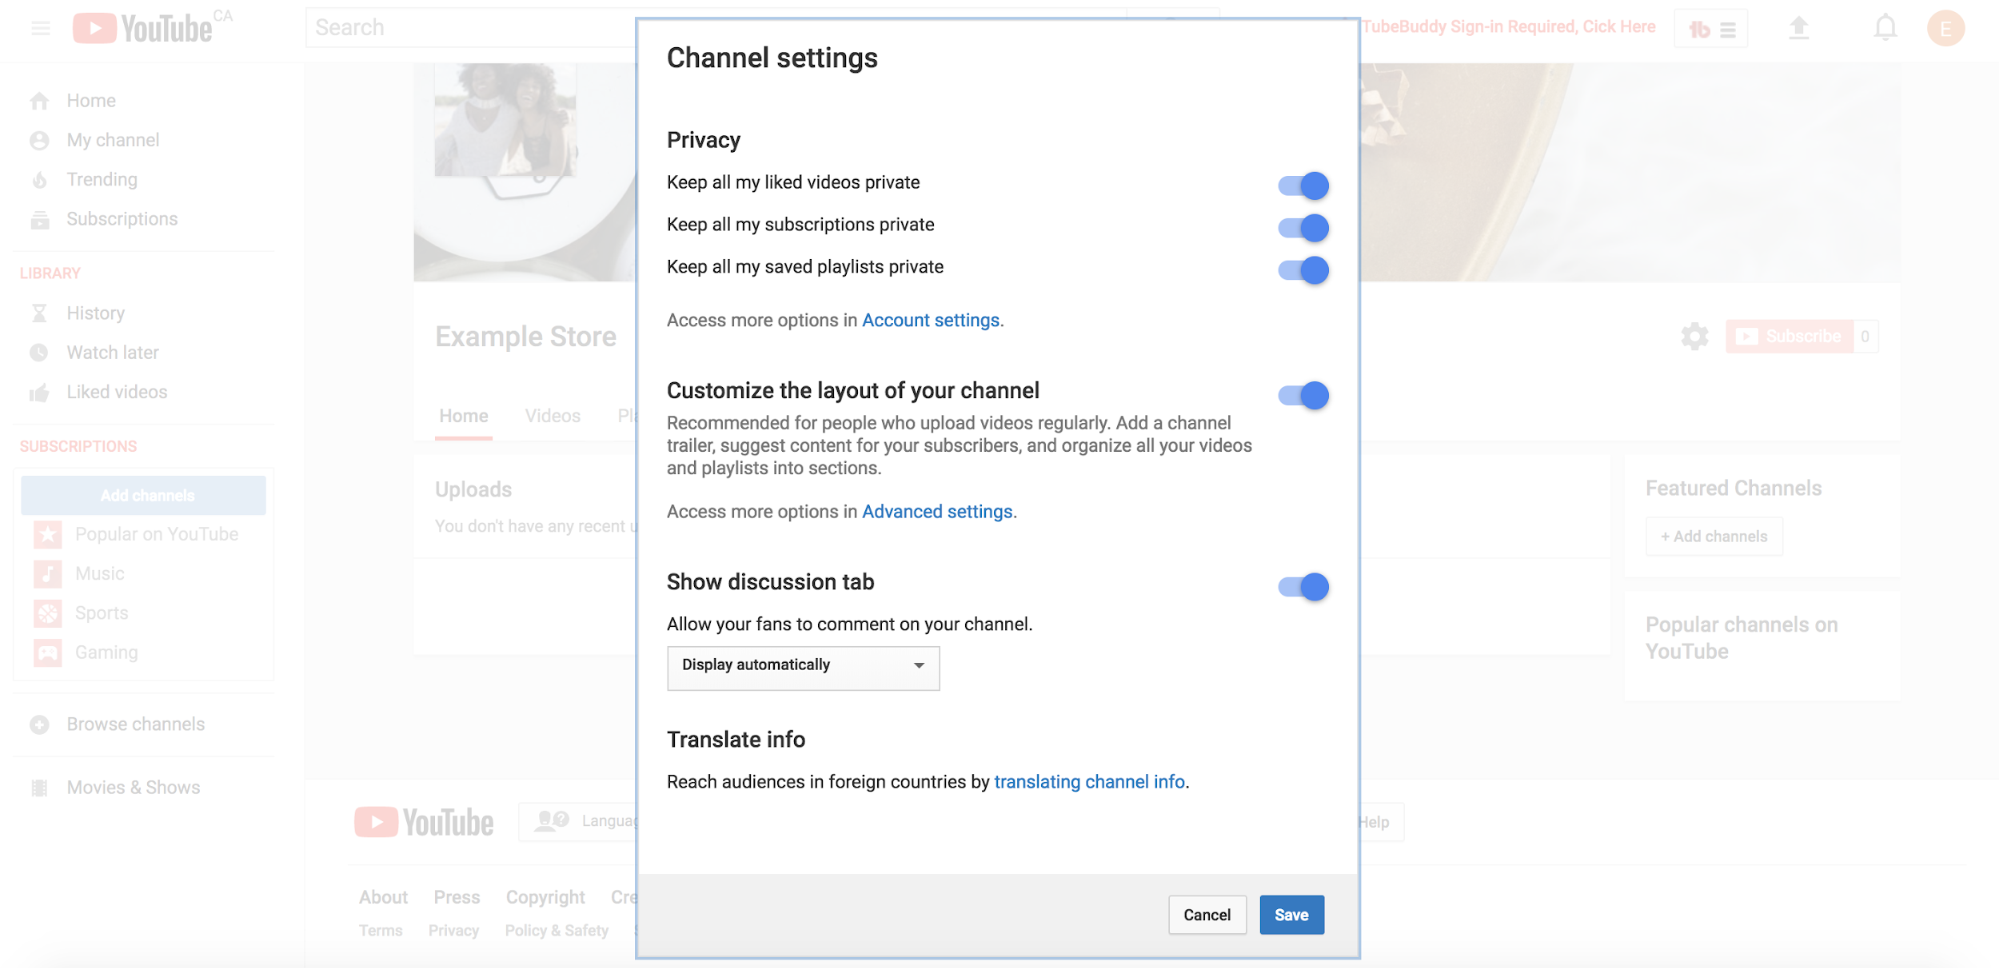 YouTube channel settings details